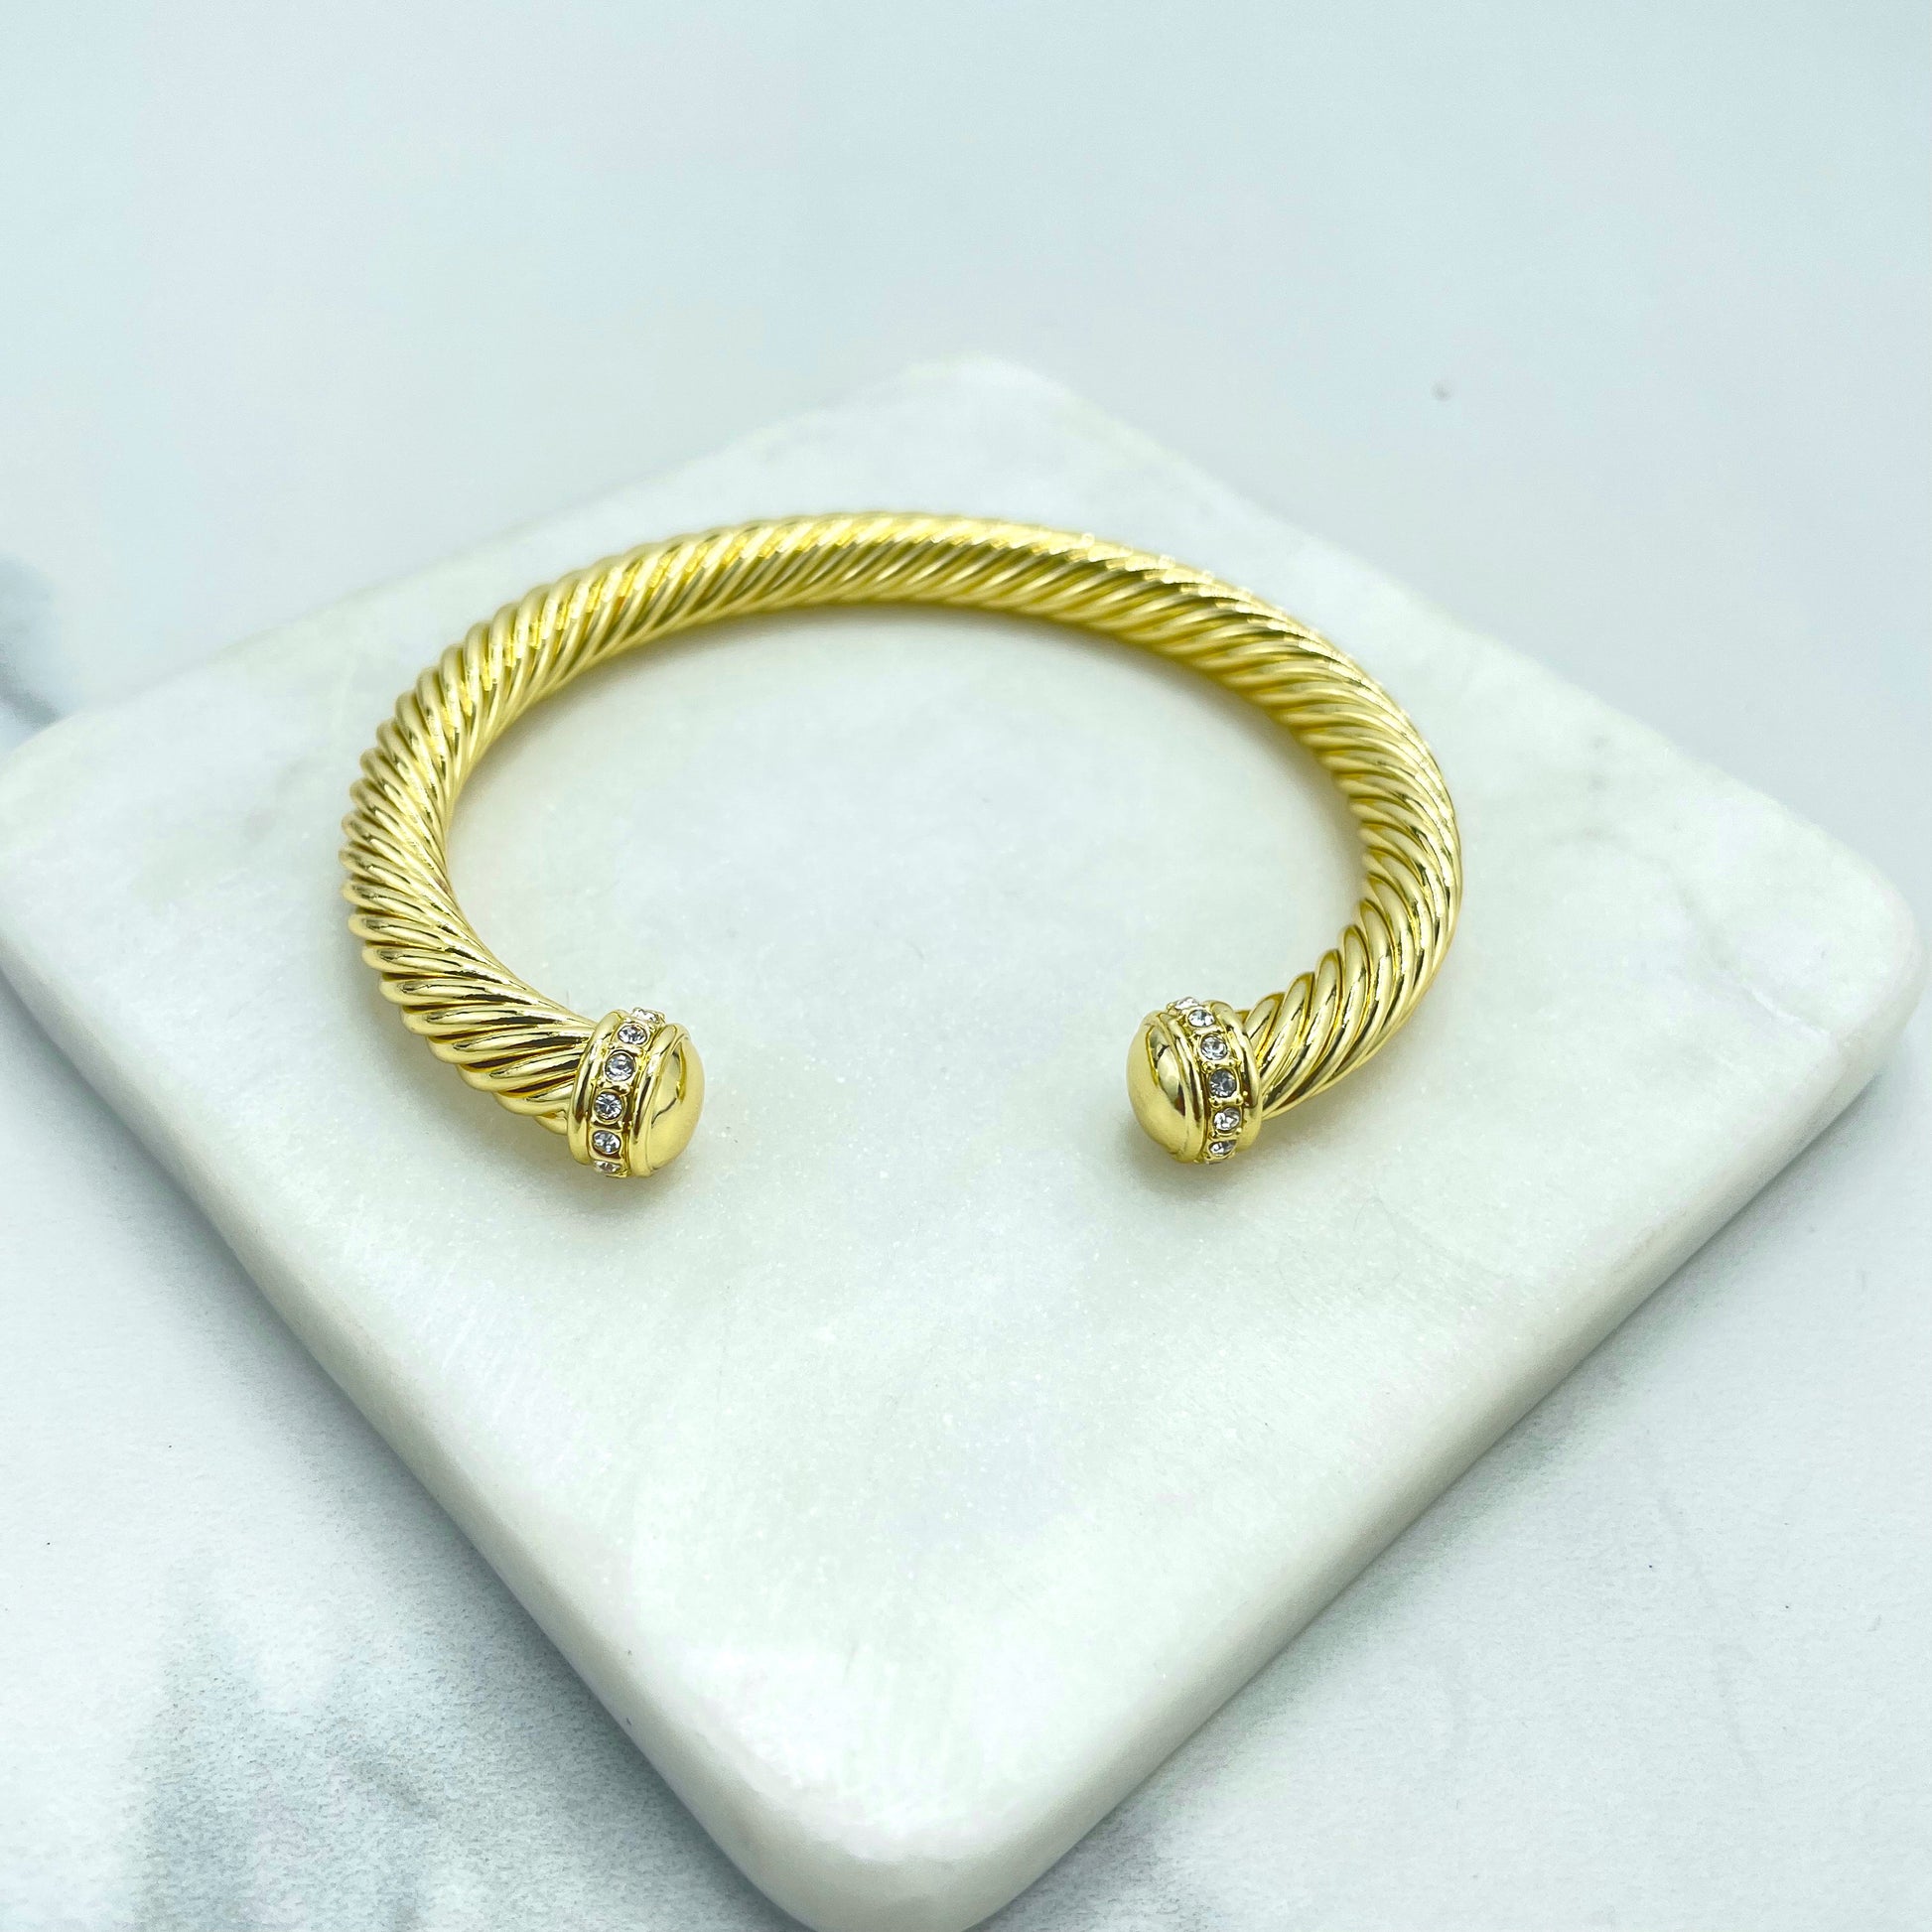 18k Gold Filled and Silver Filled Cable Cuff Bracelets, All Gold, Triple Cross or Triple Cord, Wholesale Jewelry Making Supplies